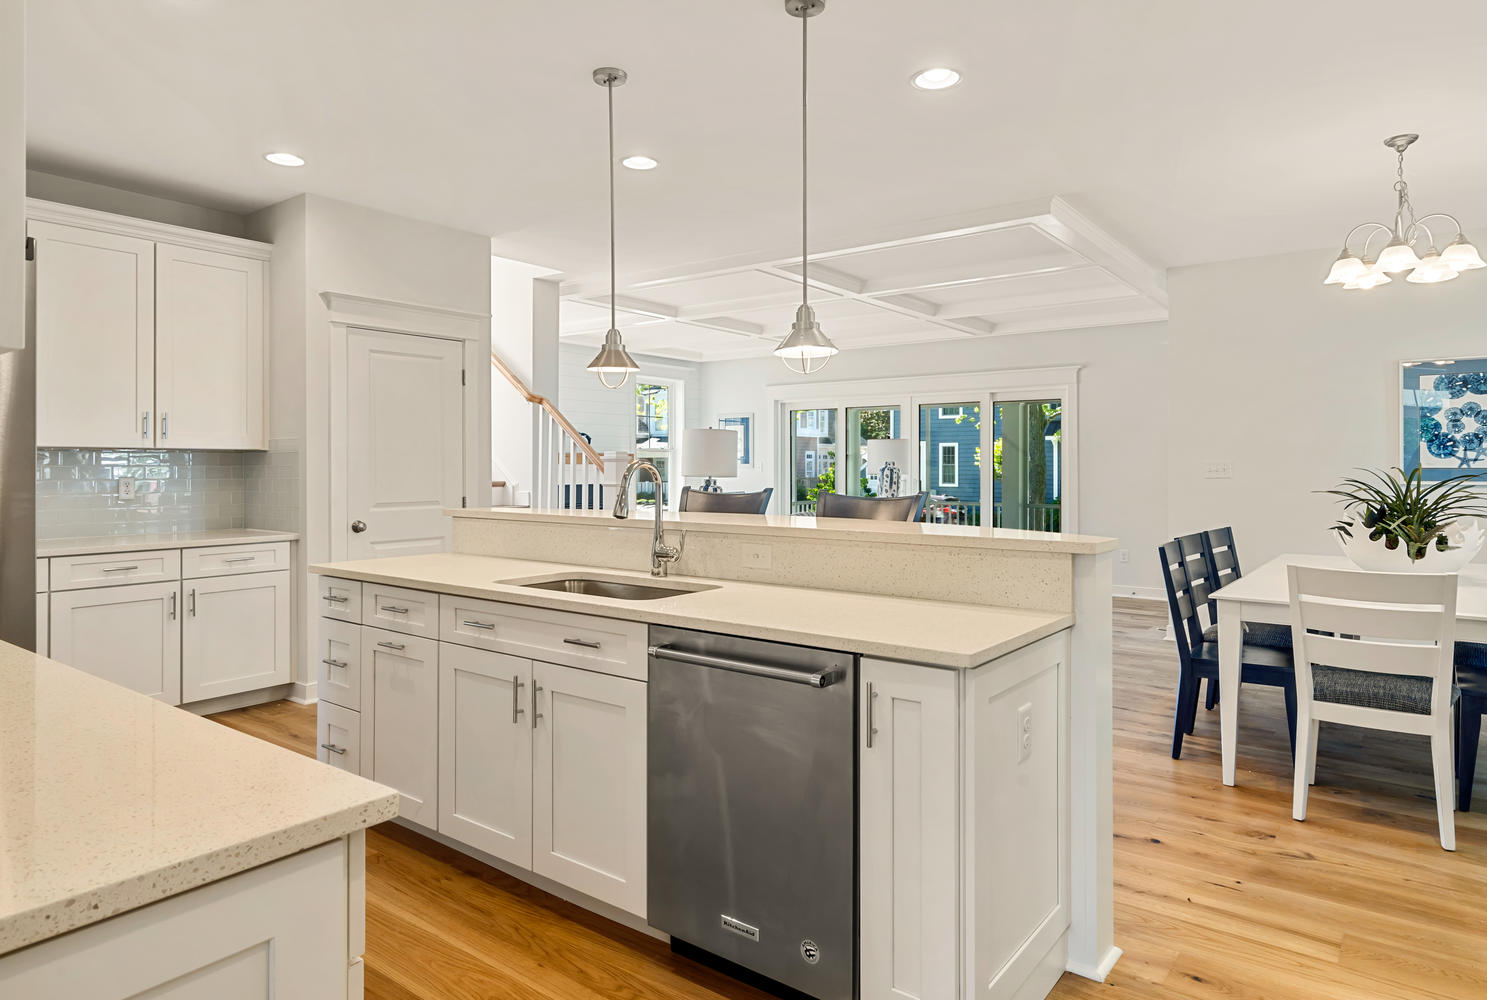 Kitchen with White Cabinets, Quartz Counters, and Stainless Steel Appliances